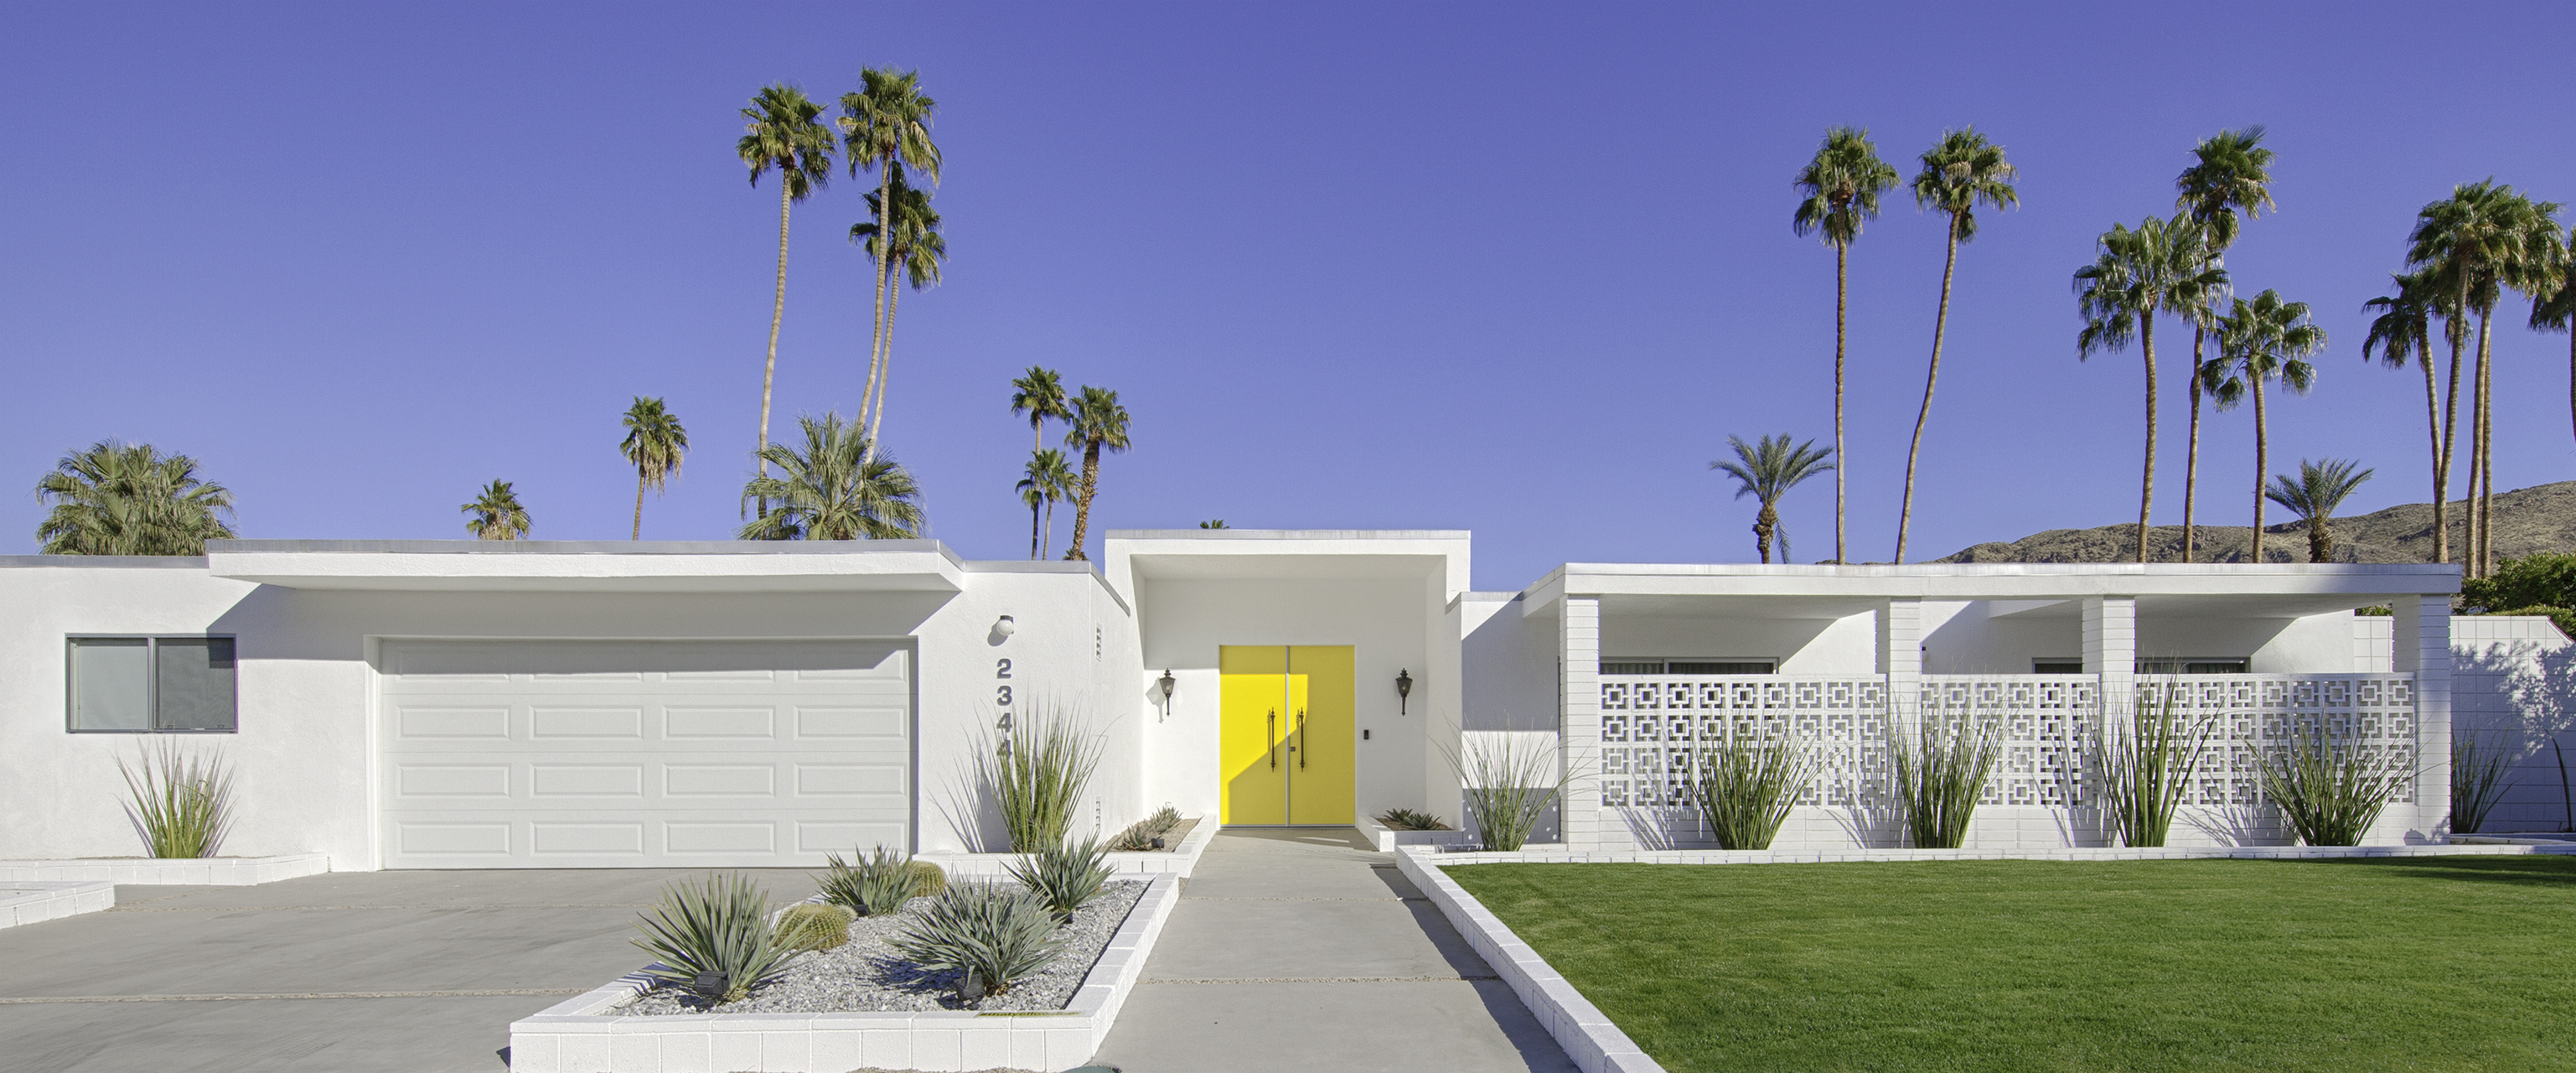 Learn about Palm Springs architects who designed some of the best mid-century modern homes.